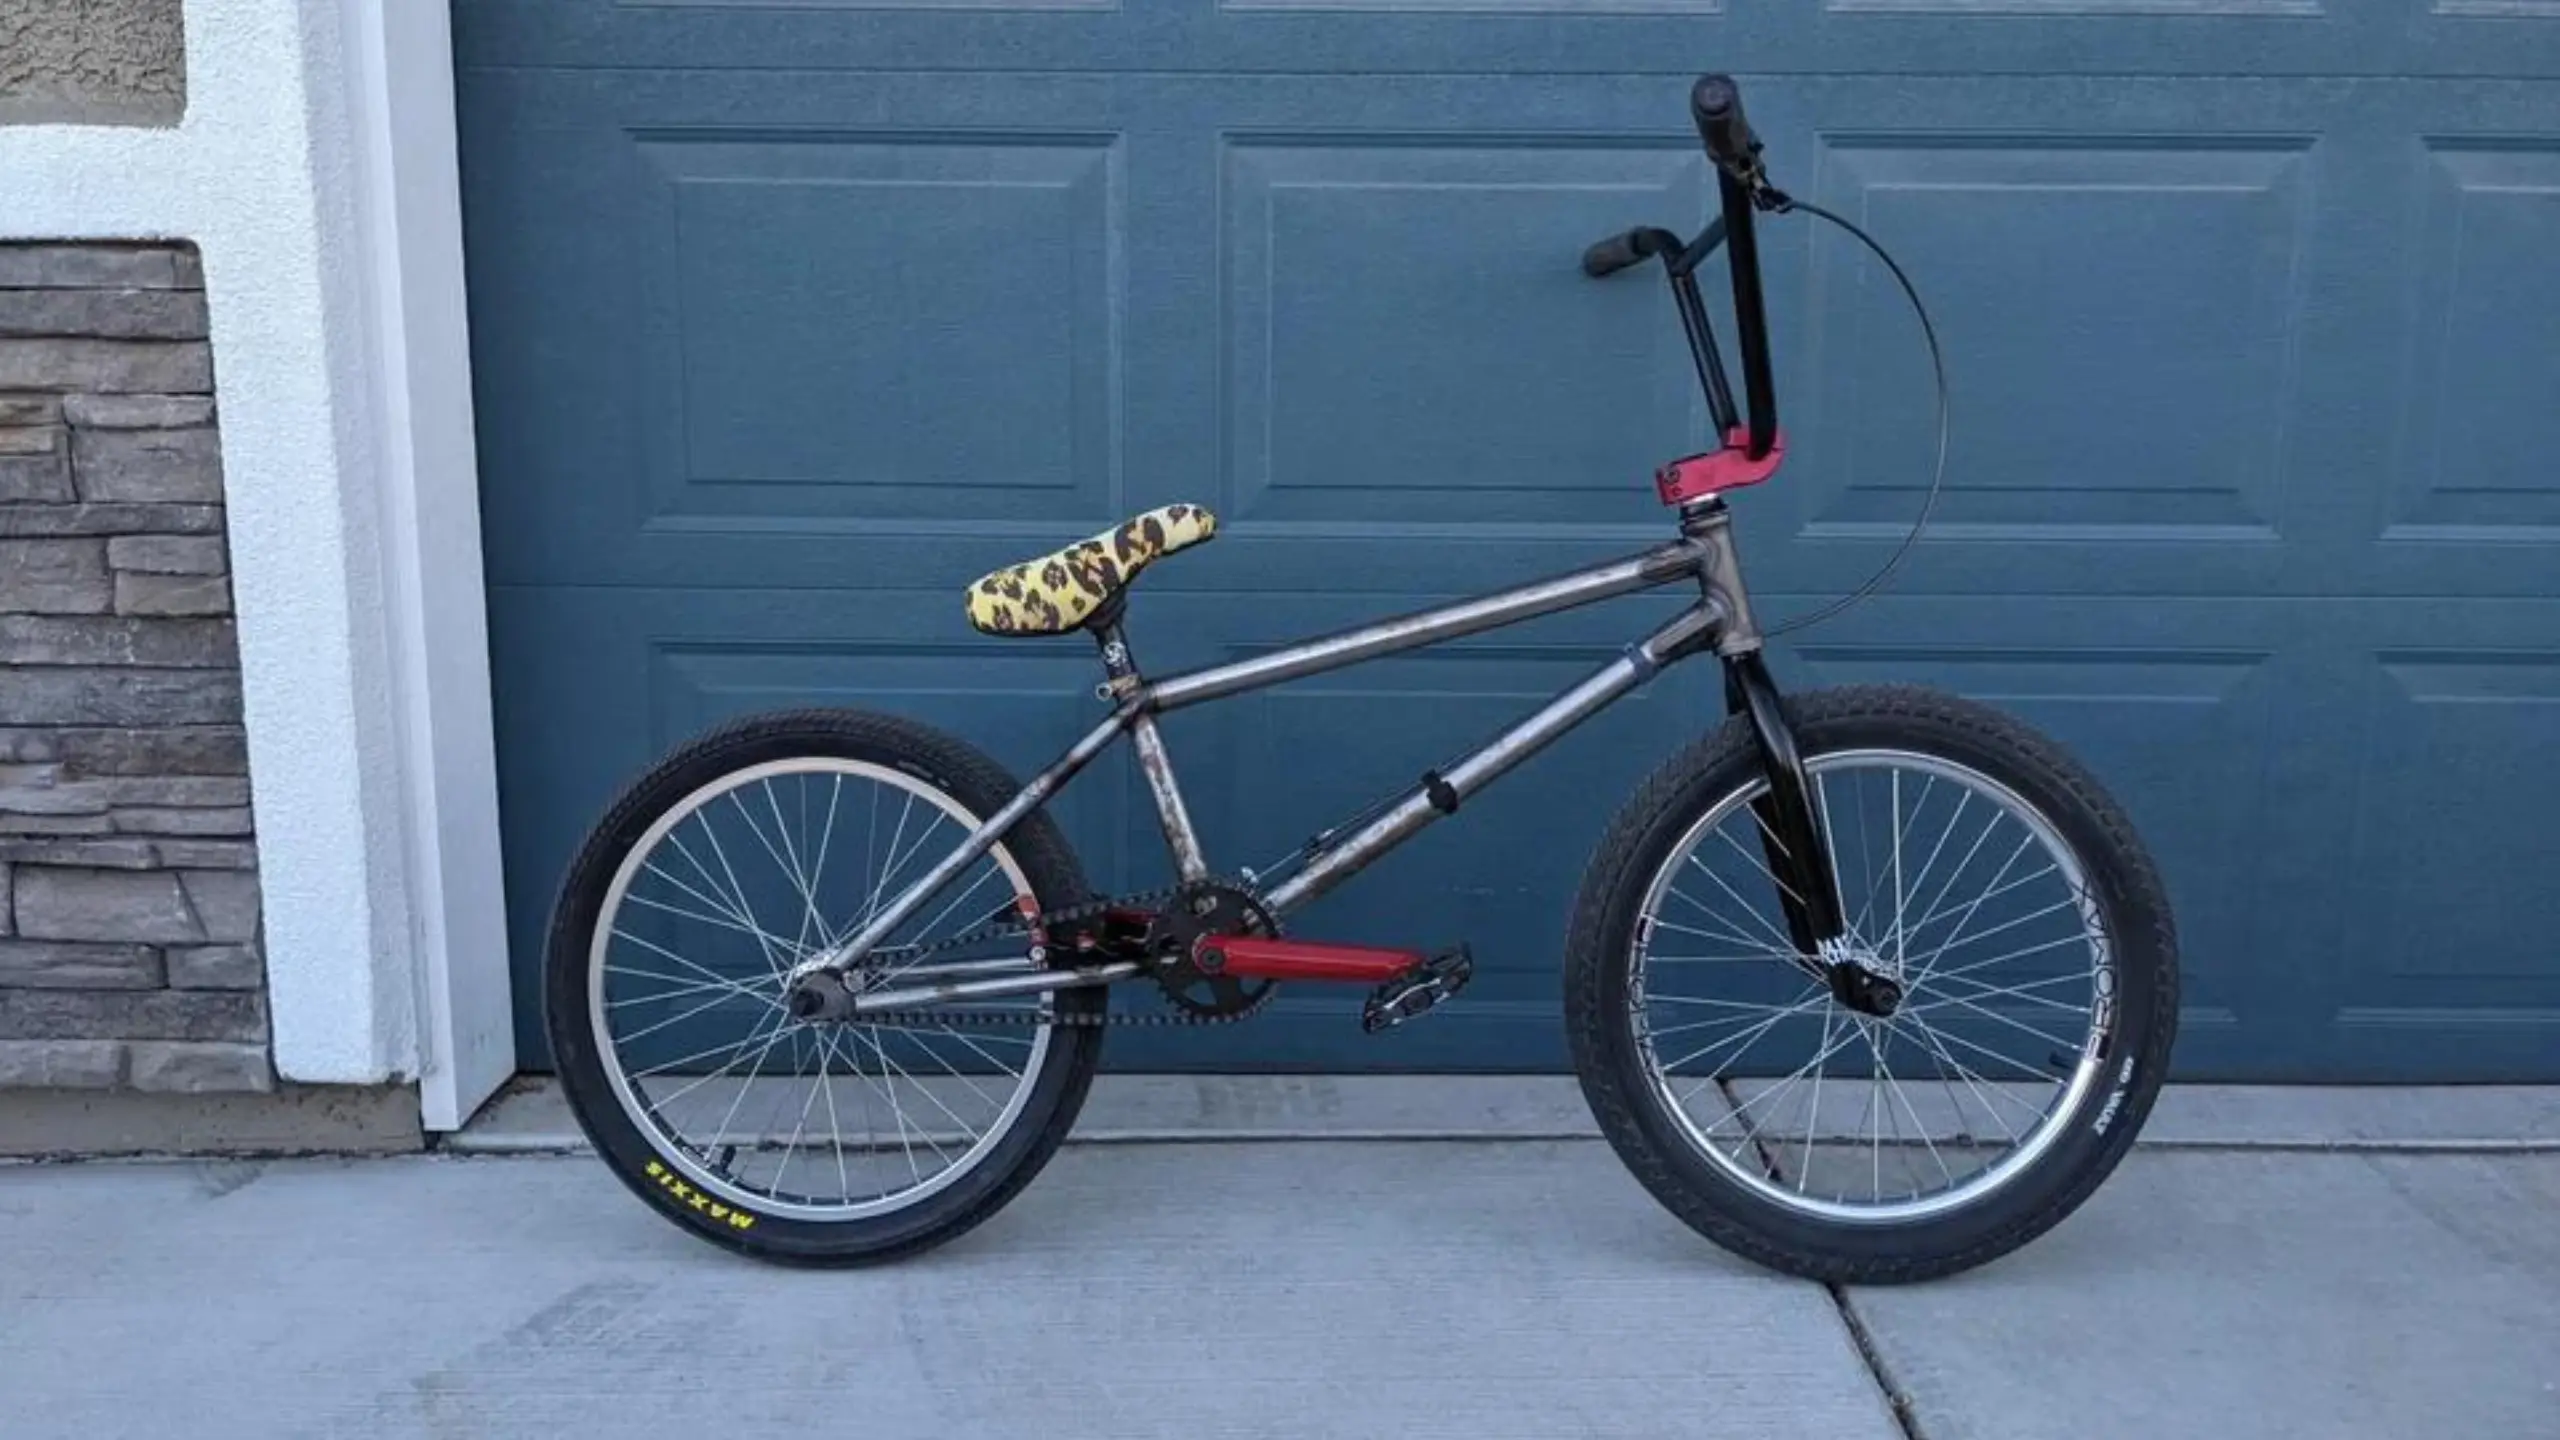 Why Are BMX Bikes So Small